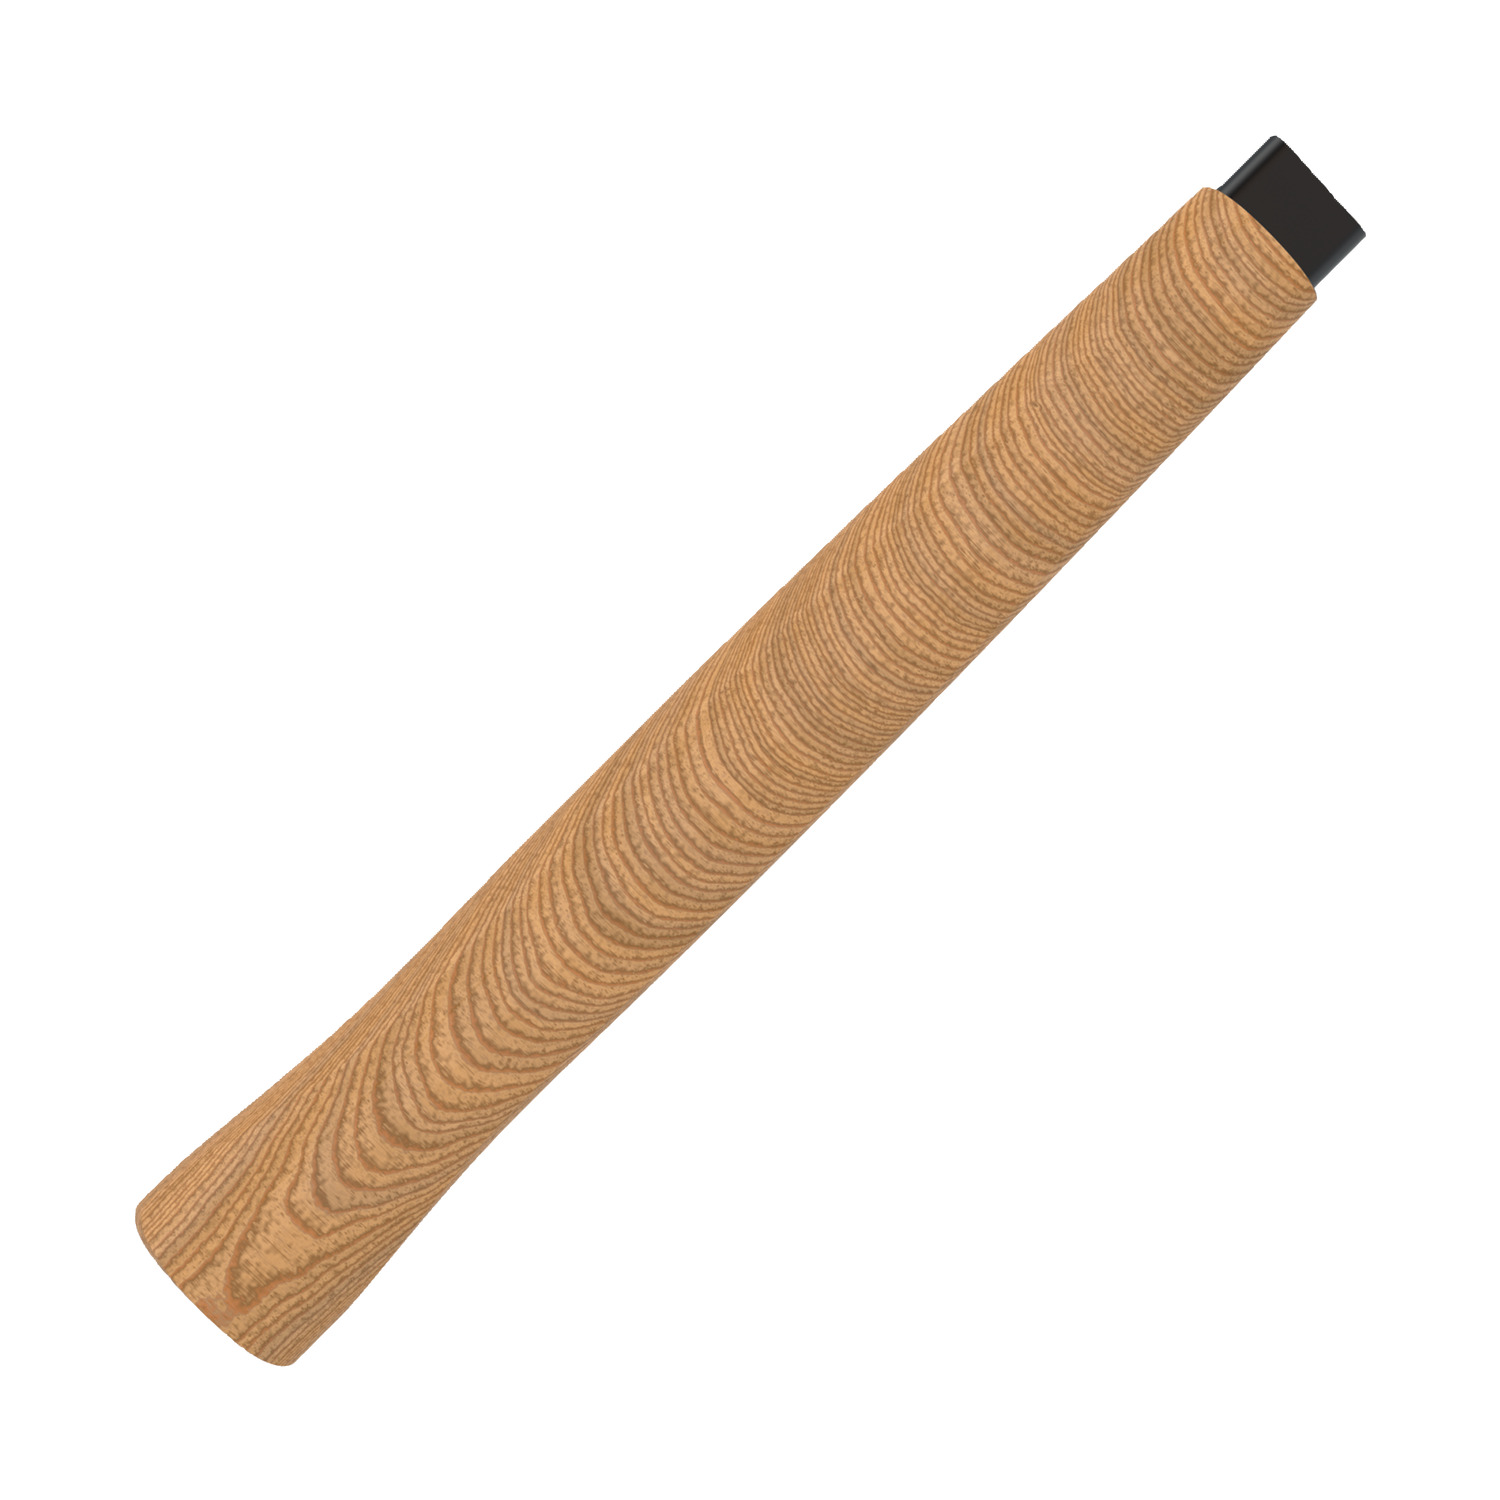 Product 98302, Handle - for Non-Rebound Mallets wood - for no. 98301 / 